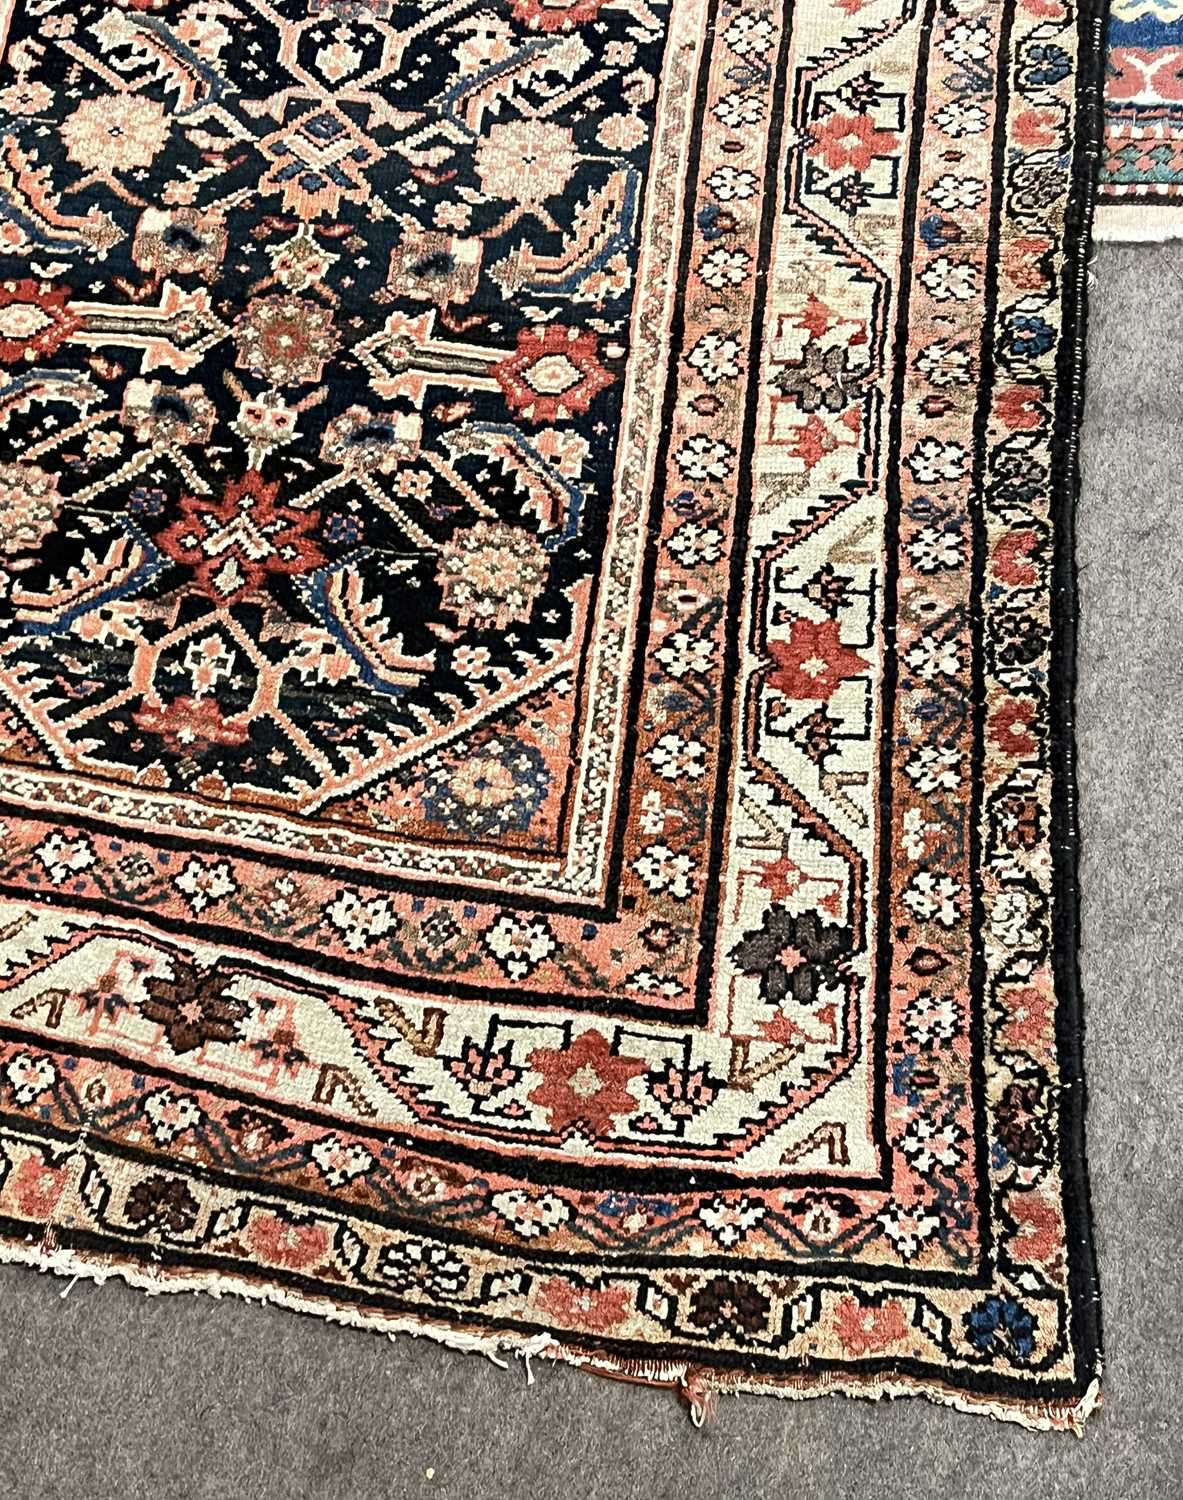 Persian wool runner carpet with central leaf design 108 x 375cm - Image 2 of 4